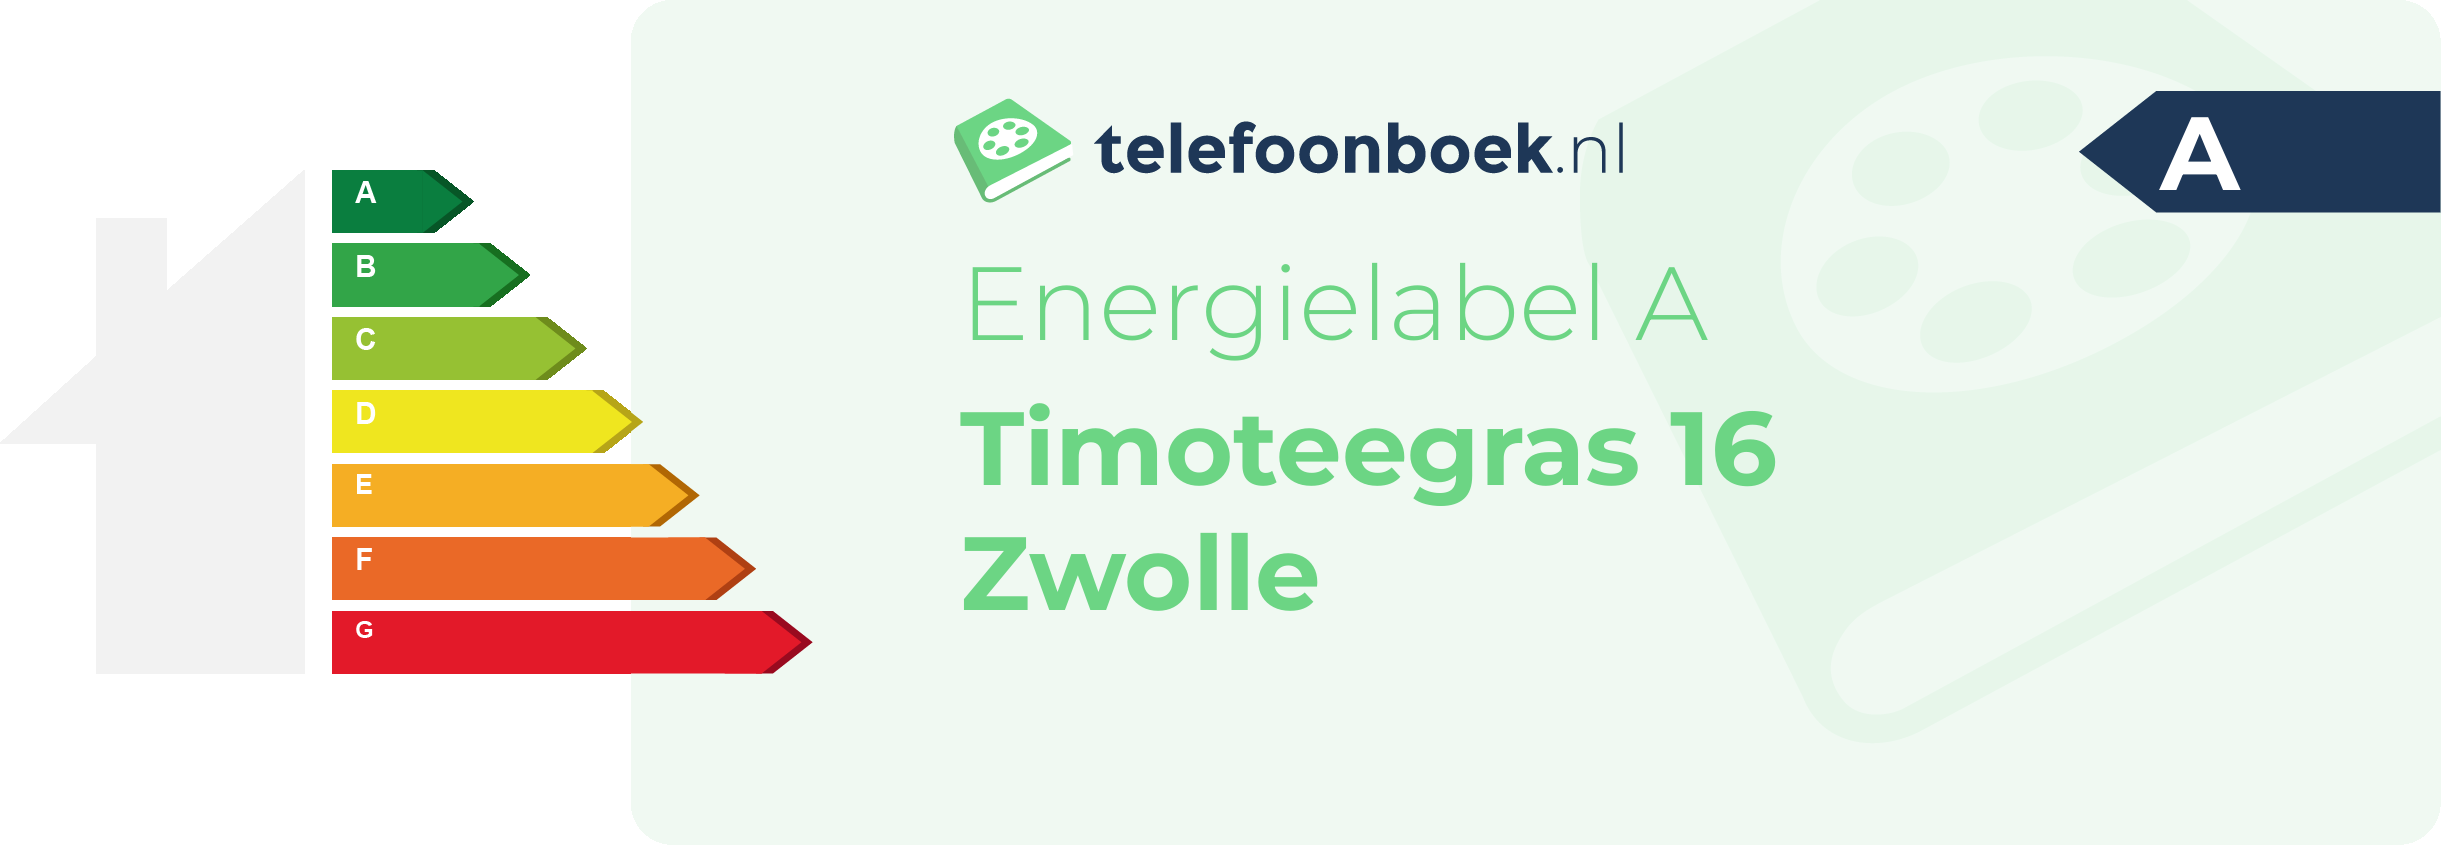 Energielabel Timoteegras 16 Zwolle